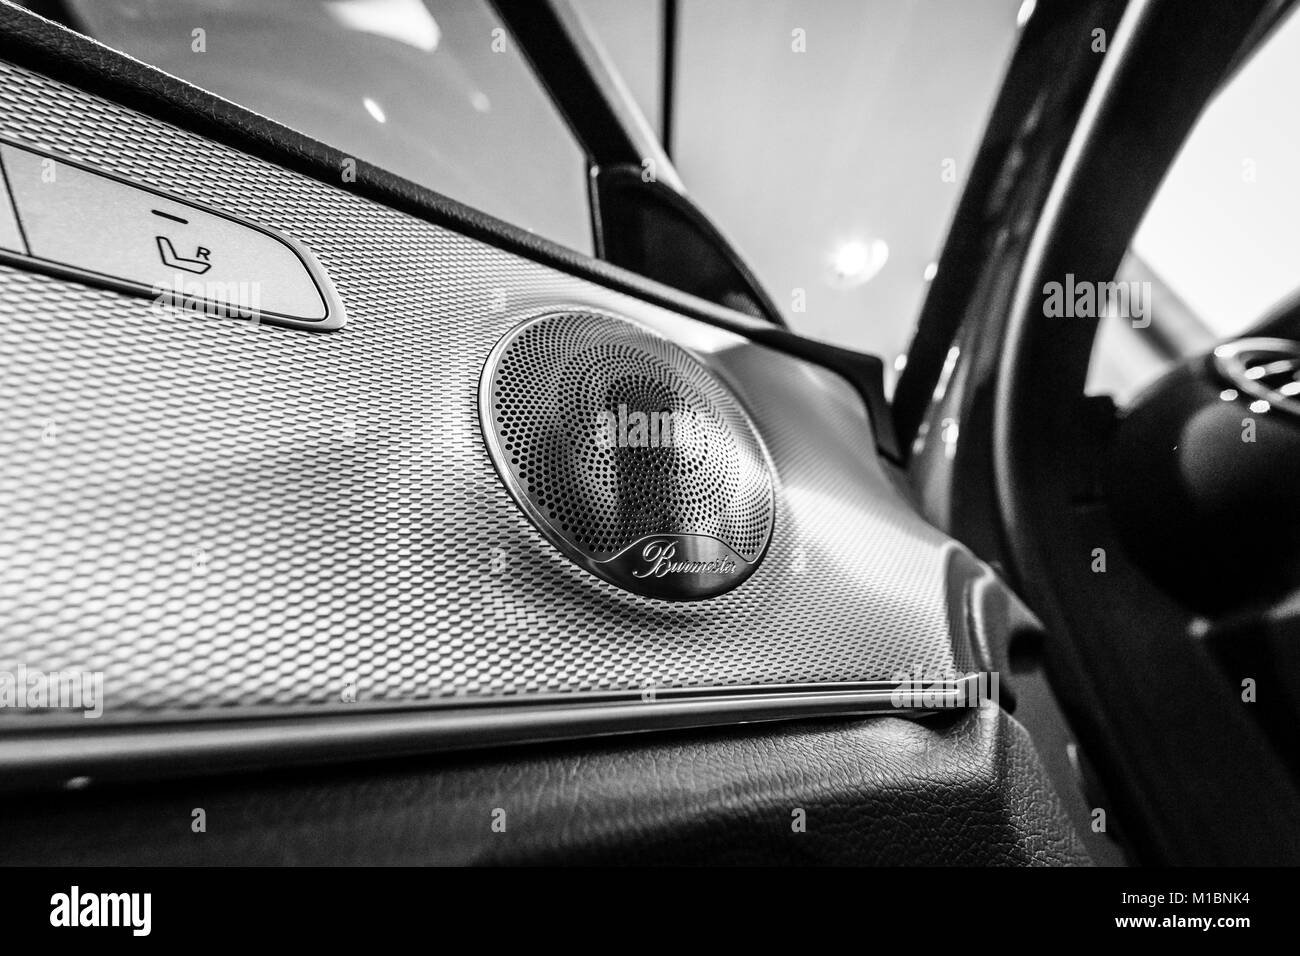 BERLIN - DECEMBER 21, 2017: Showroom. Speaker of the executive car Mercedes-Benz E-Class E220d (W213). Close-up. Black and white. Since 2017. Stock Photo